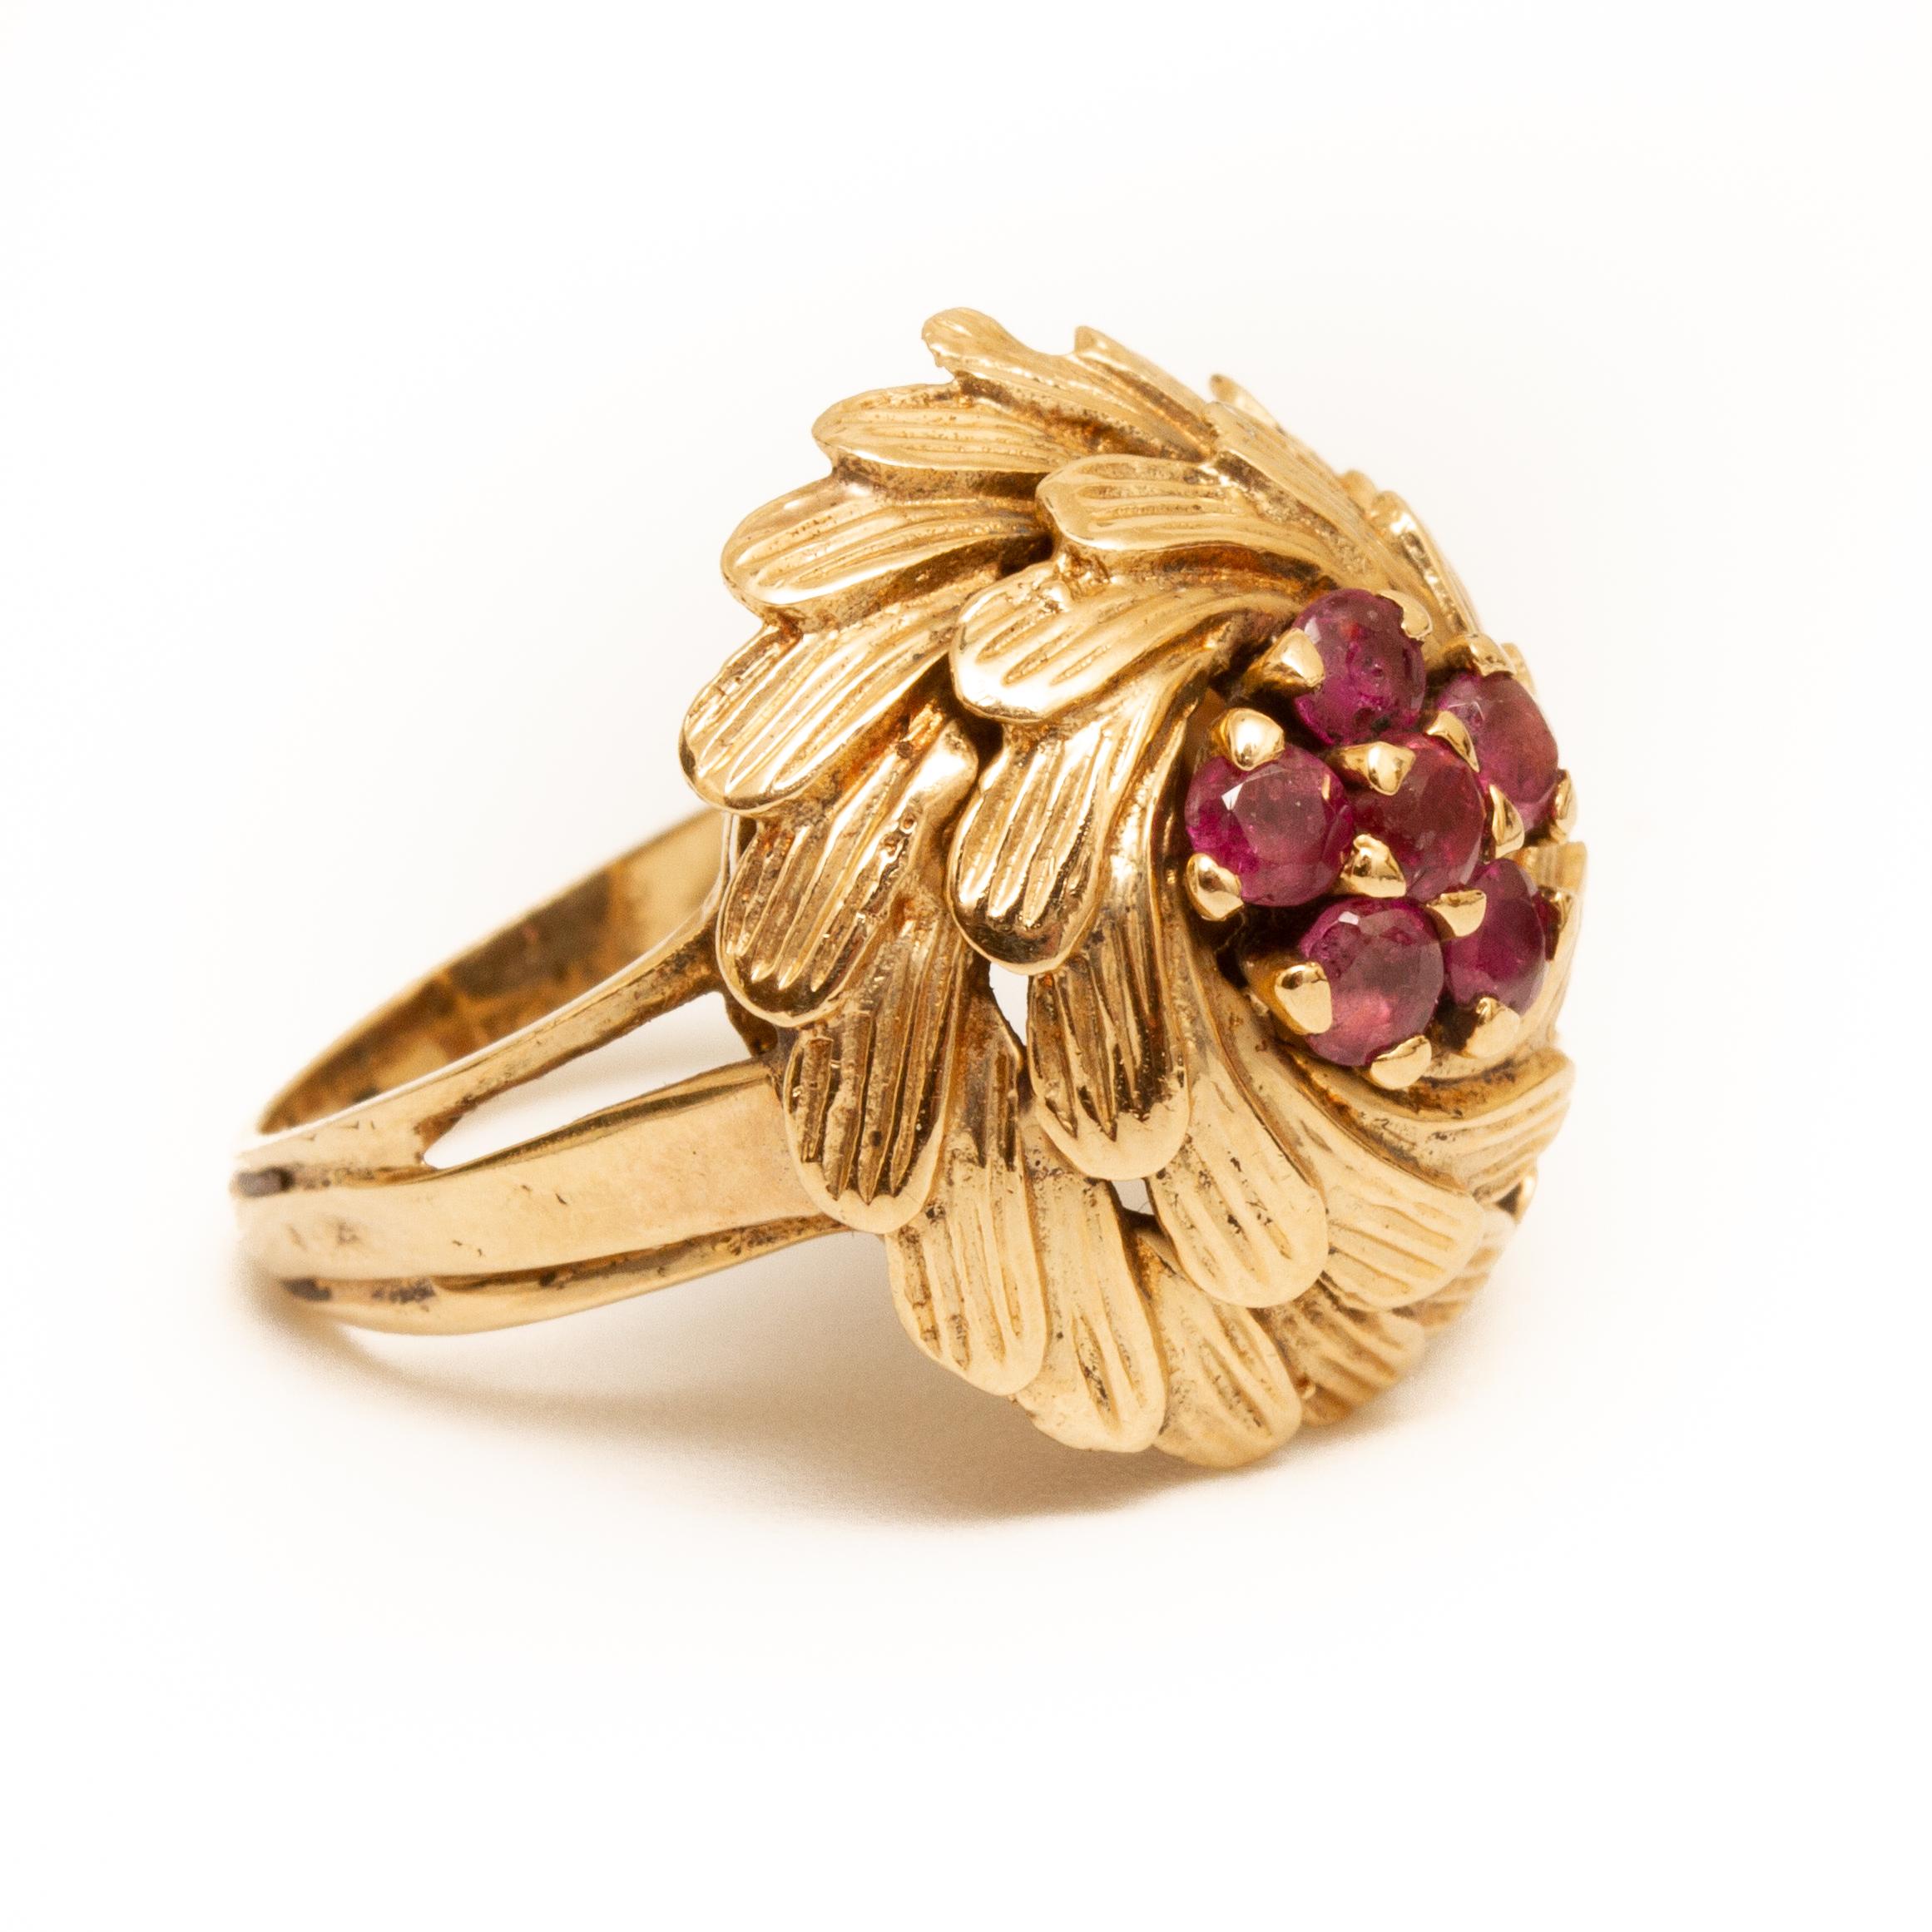 14k gold ring mounted with rubies size approx. 6. Ring has retainer guard and weighs approx. 3.5 dwt. From the Broussard estate noted jewelry collection Park Avenue New York